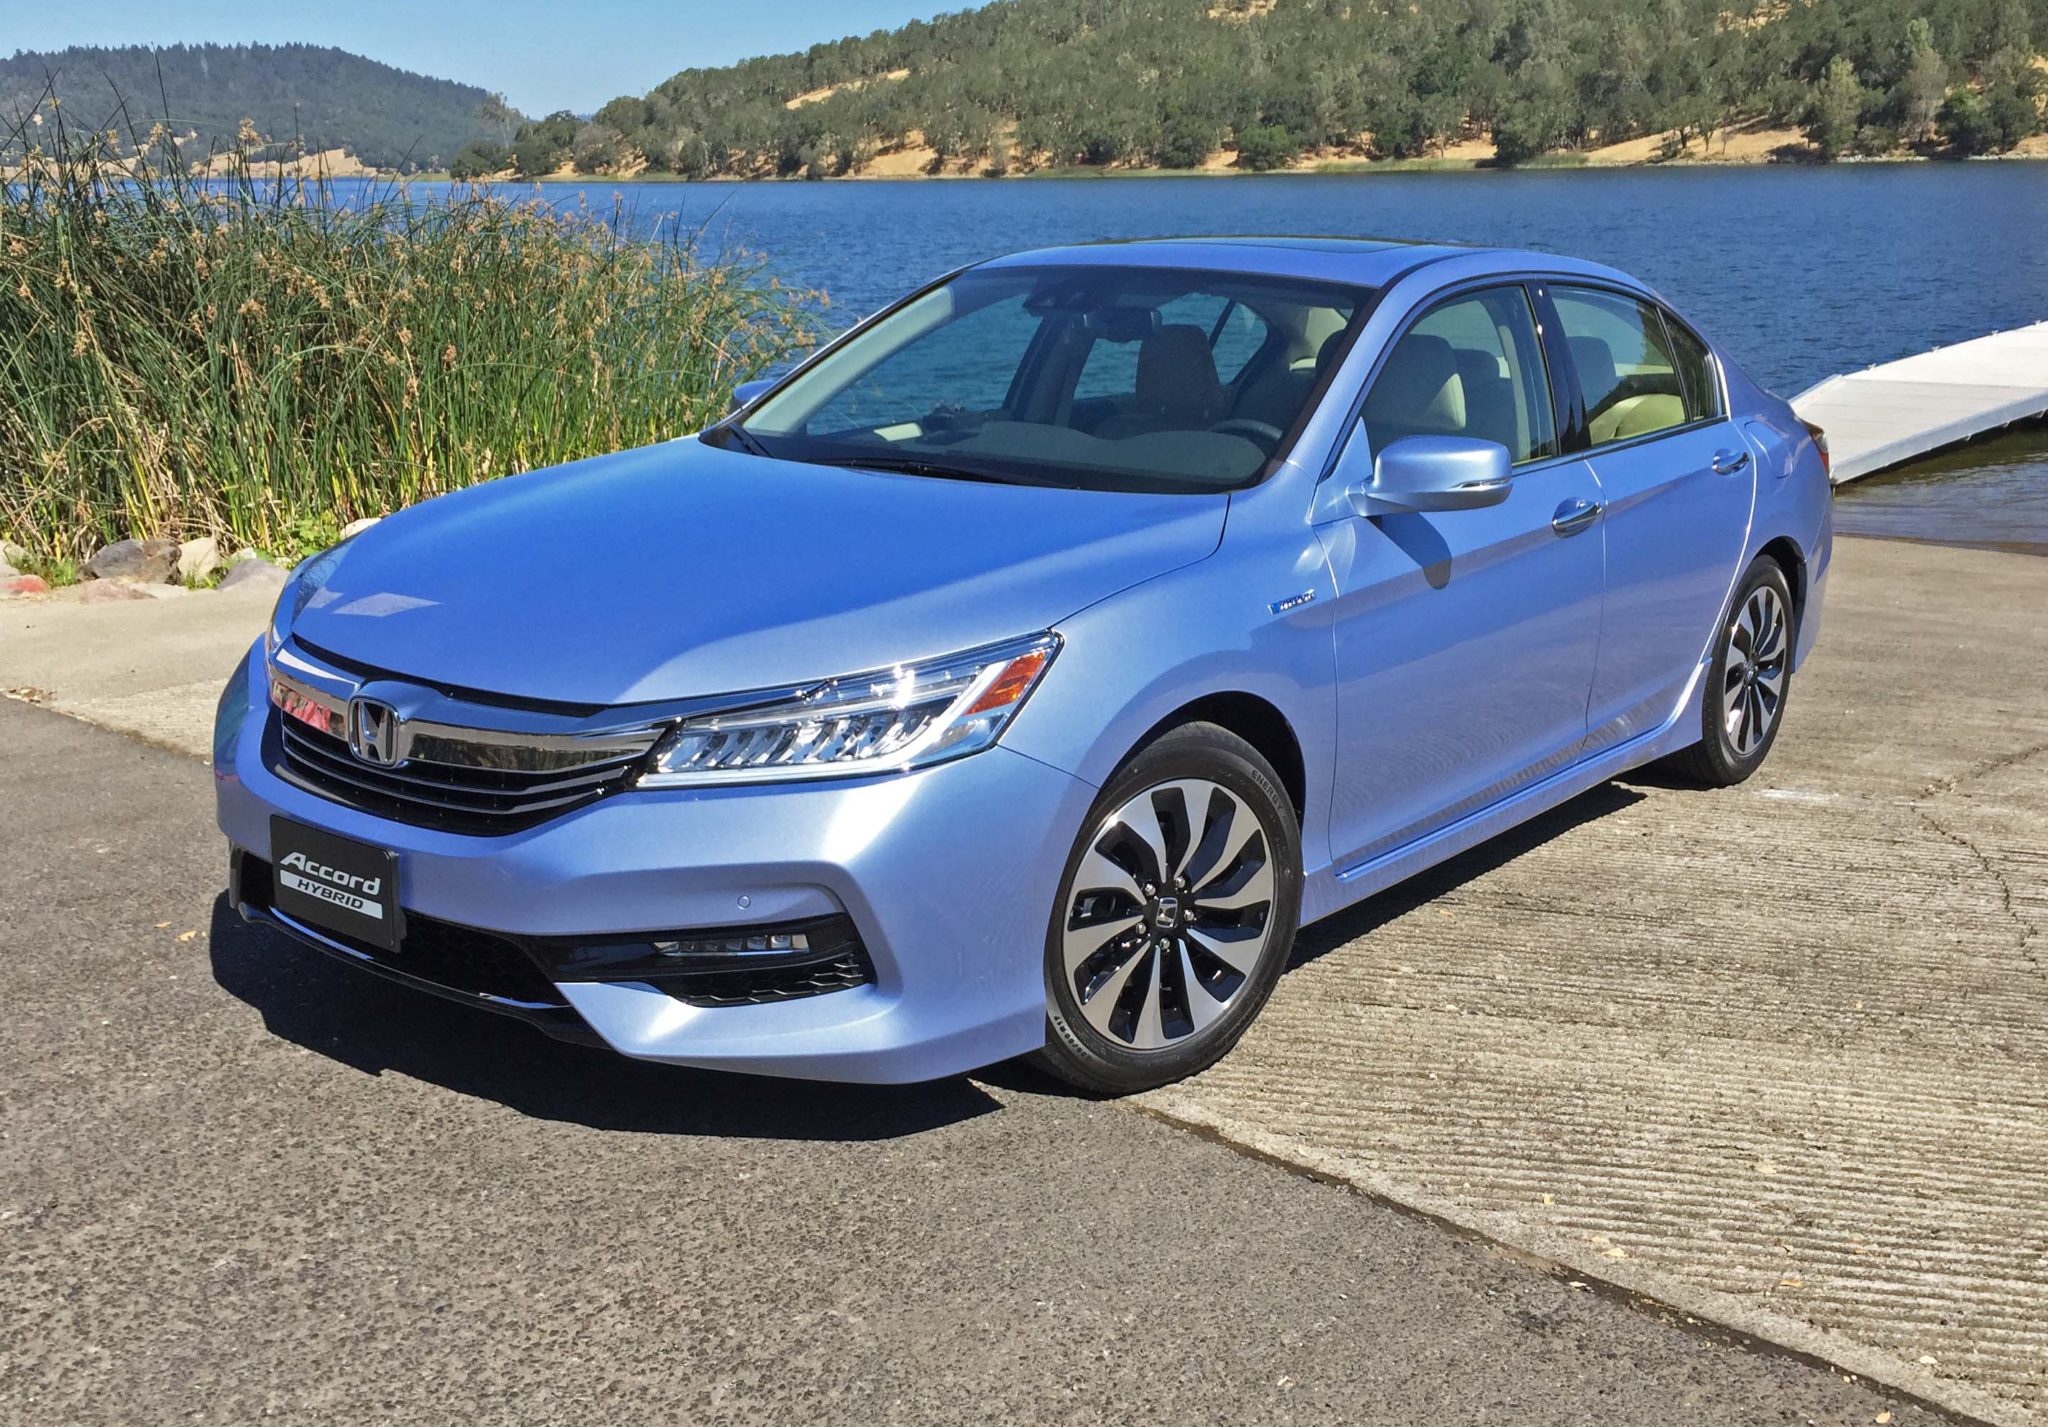 2017 Honda Accord Hybrid Touring Test Drive | Our Auto Expert